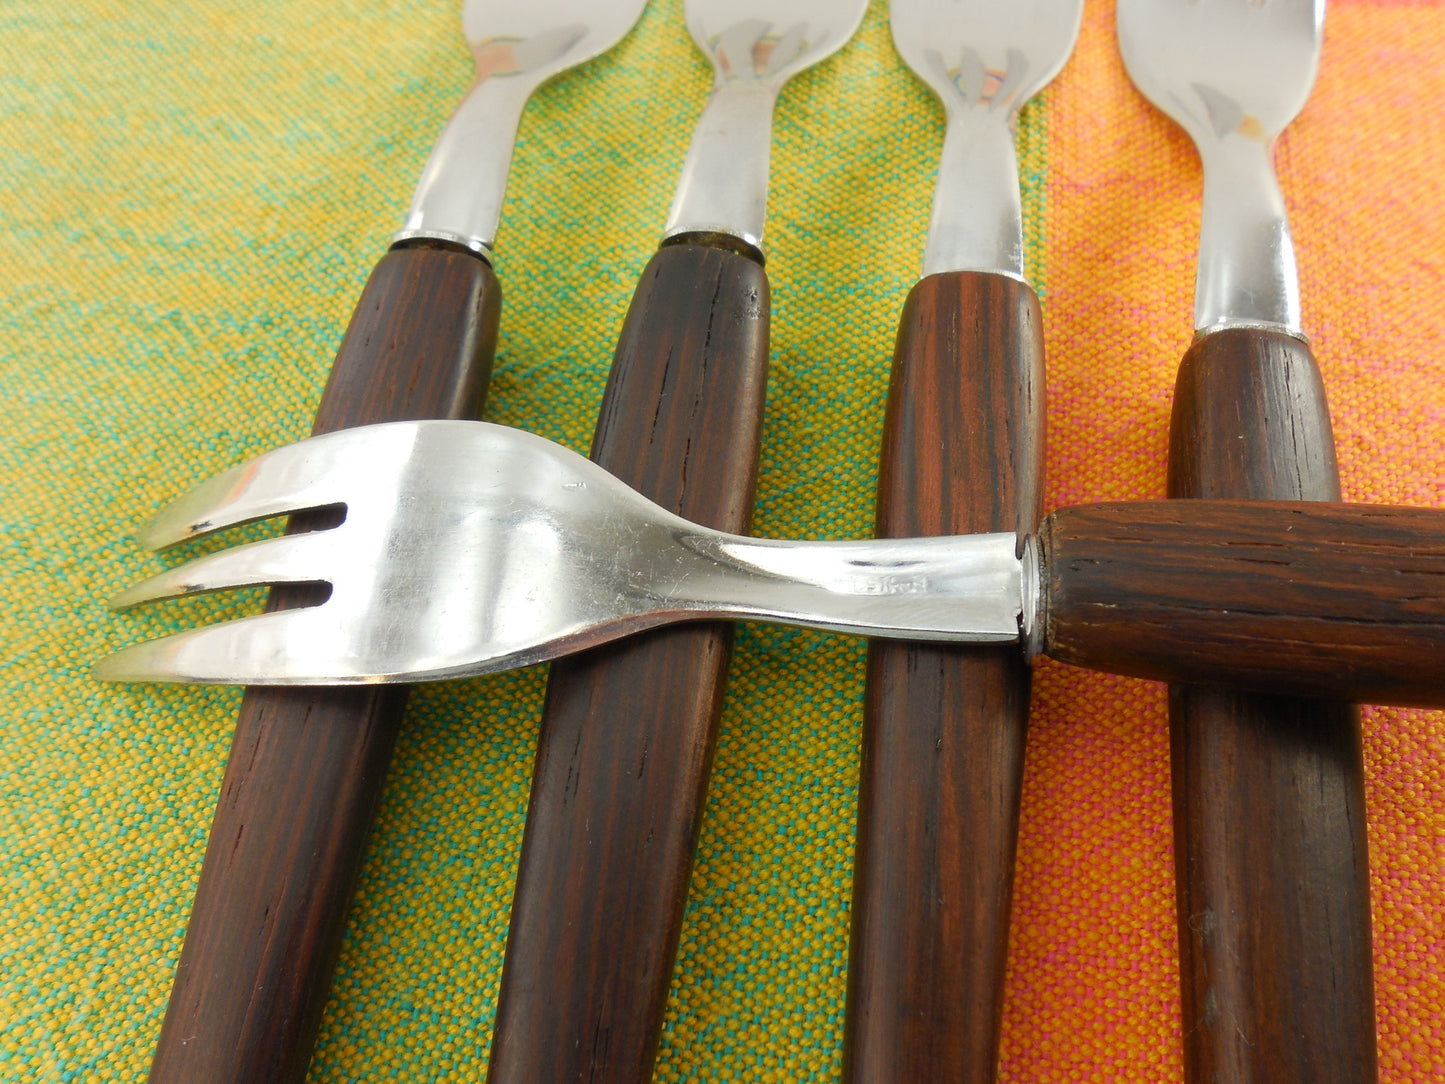 Danish Modern Salad Forks - ROSTFREI Stainless with Rosewood Handles Vintage